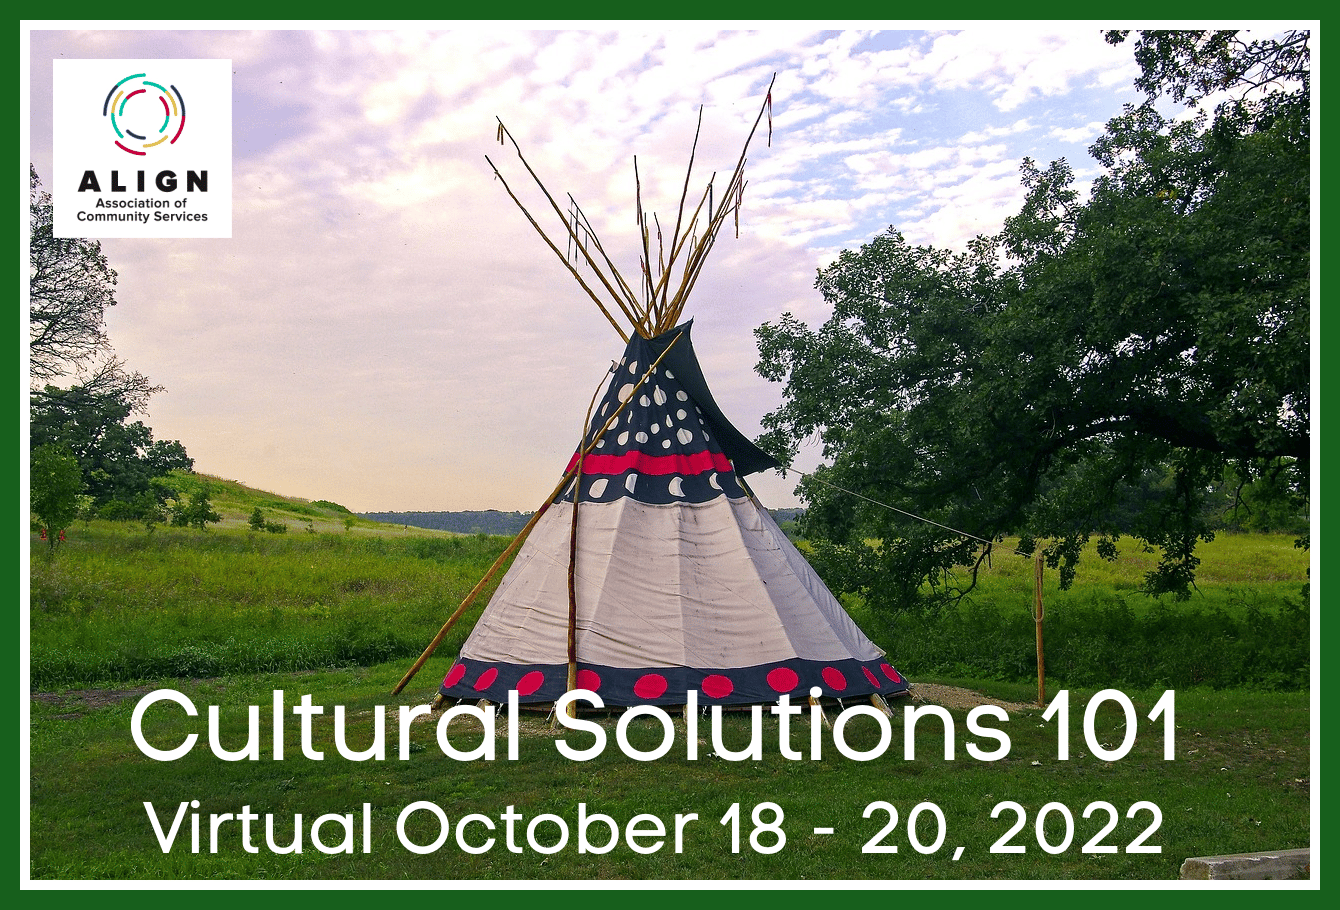 Image of a sioux teepee that is white with drk blue peak and dark blue strip along the bottom with polka dots. Text reads Align Hosts Cultural Solutions October 18 - 20, 2022